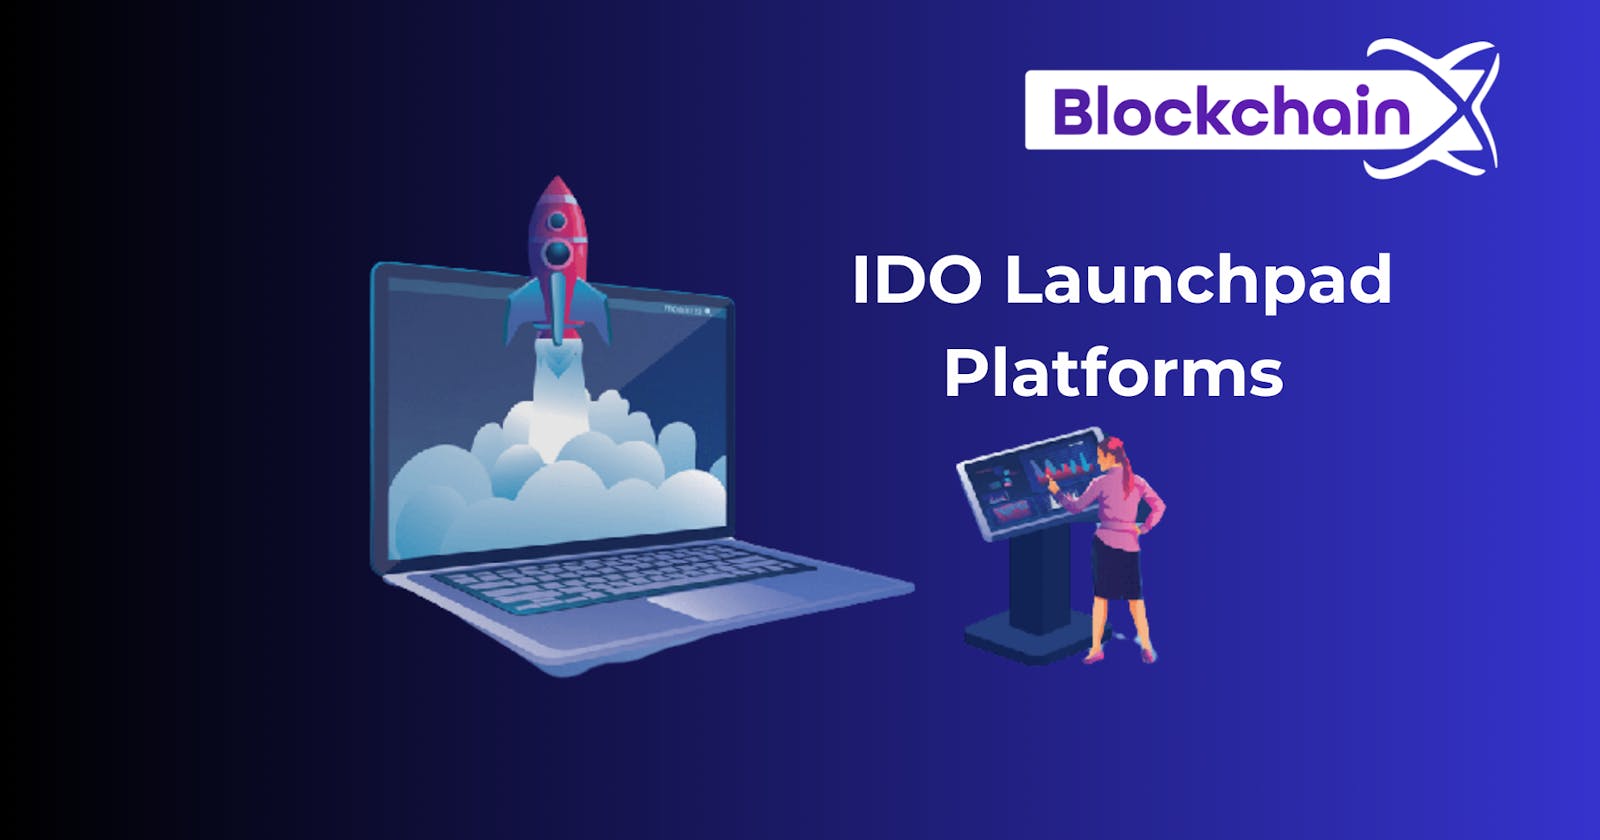 What is the best IDO launchpad platform?